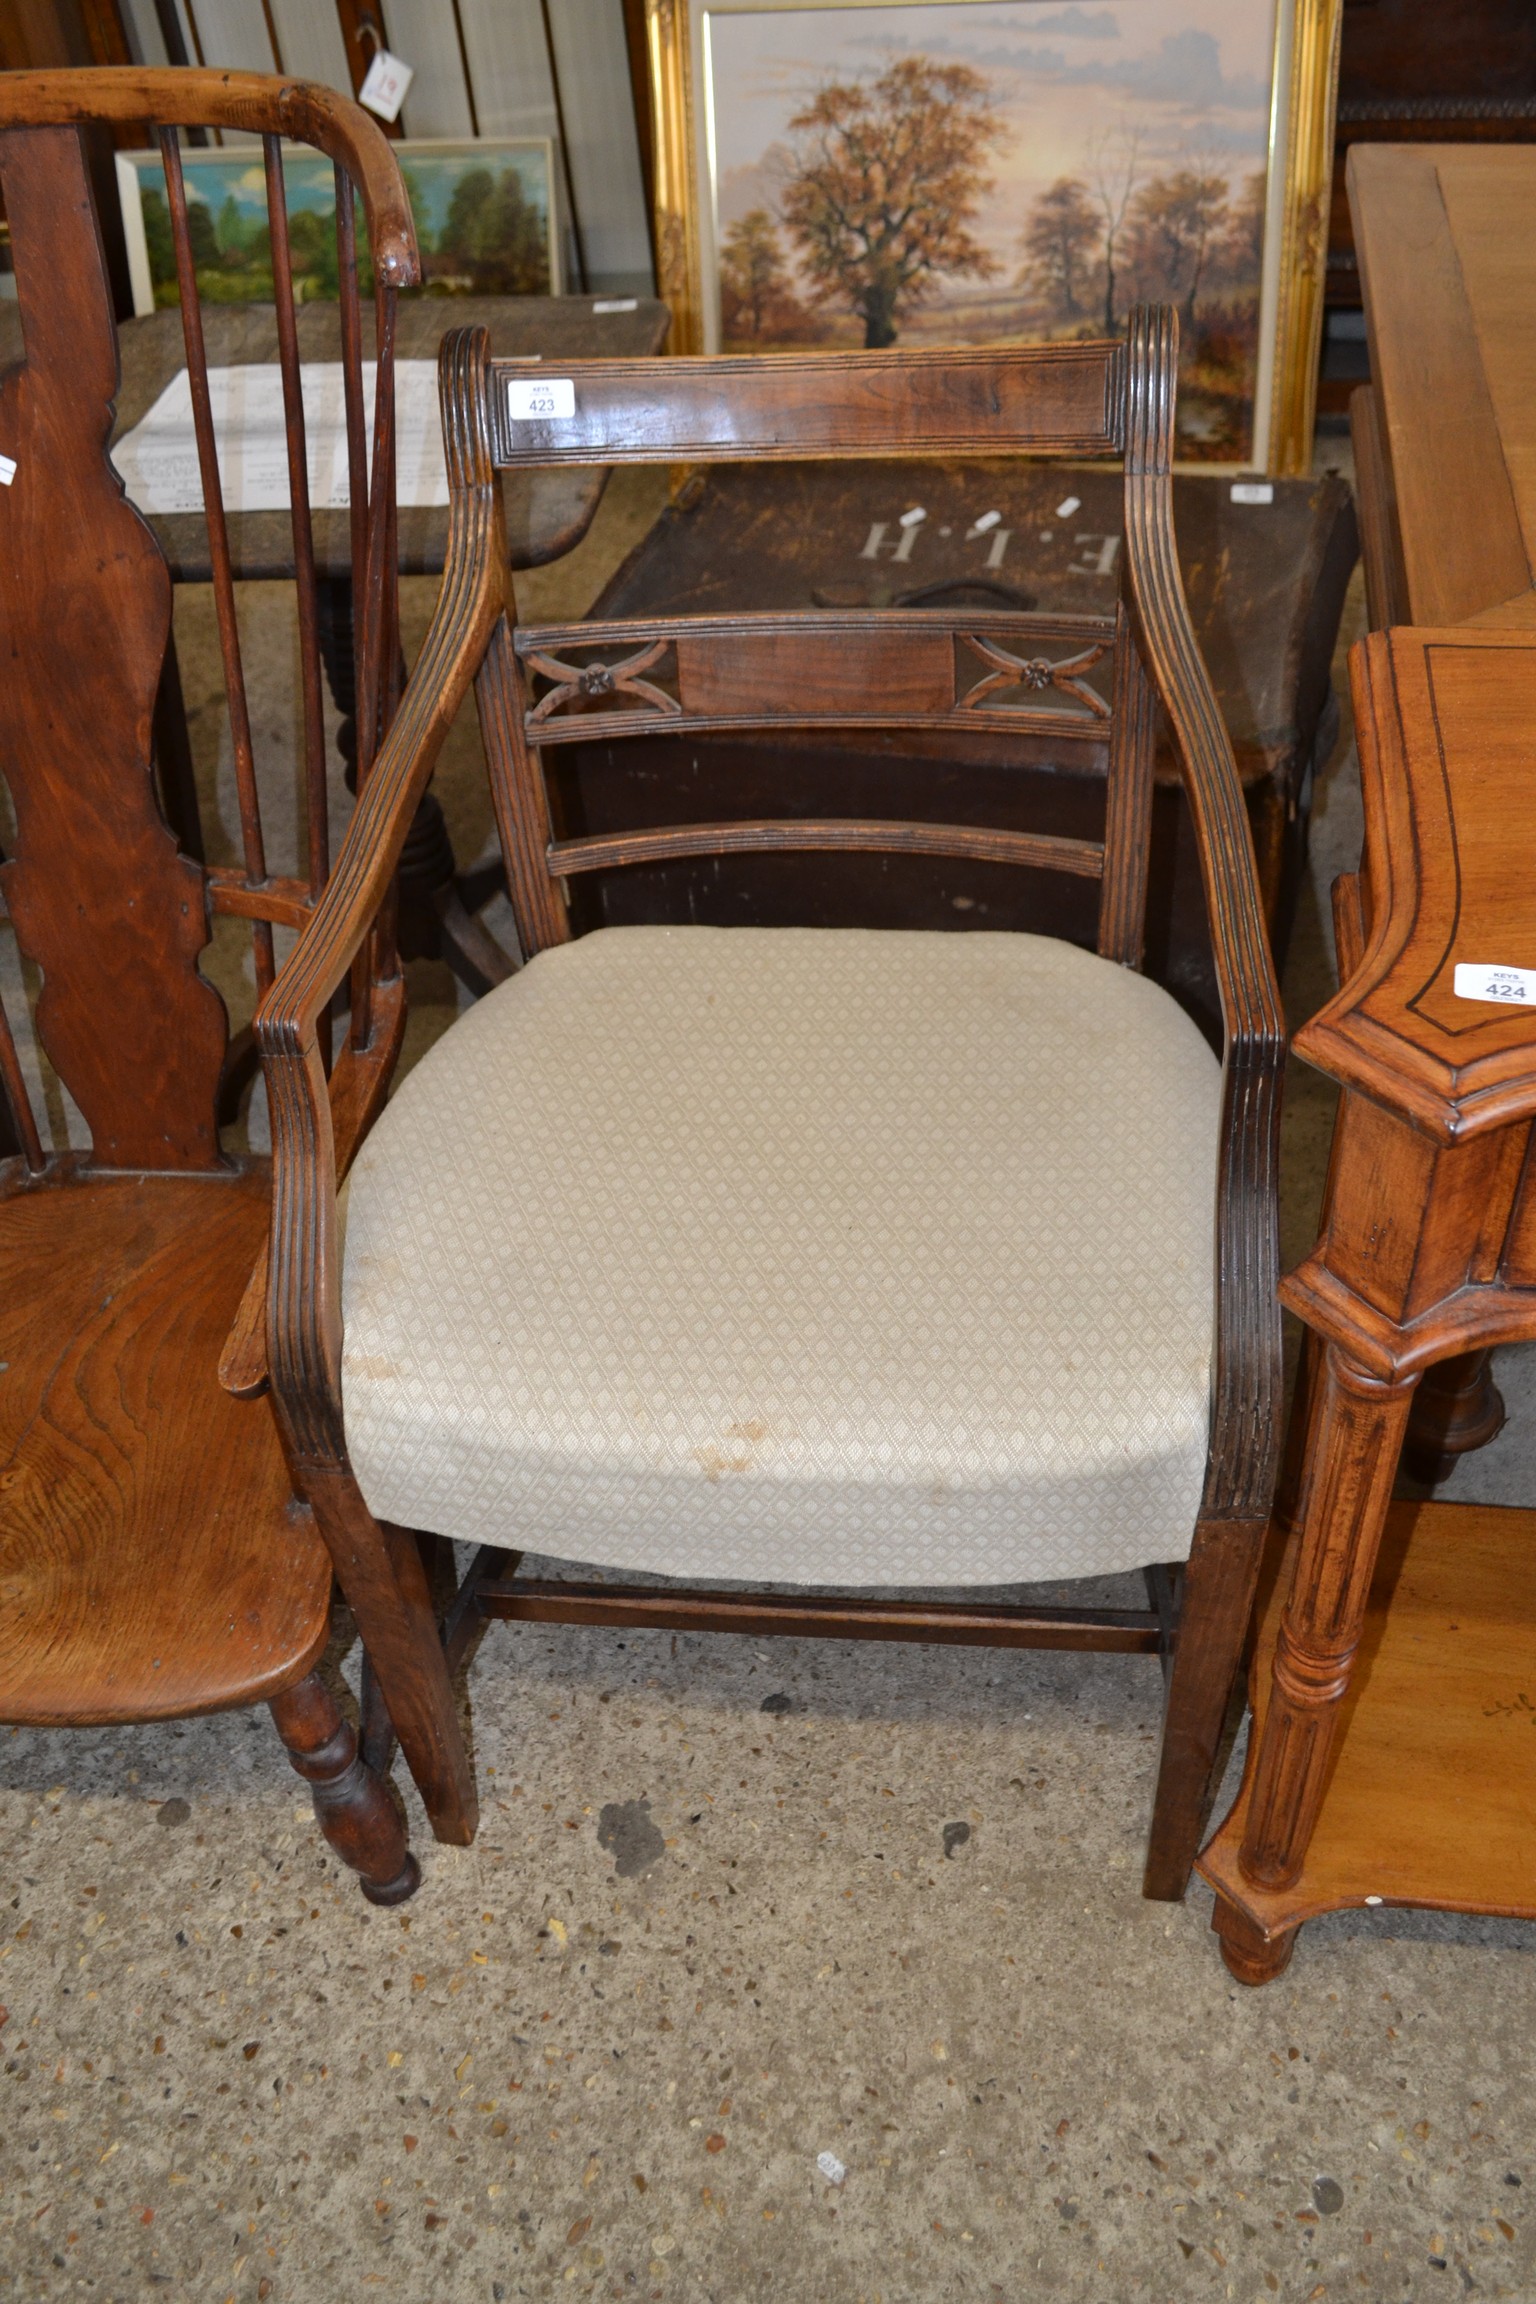 GEORGIAN BAR BACK DINING CHAIR WITH UPHOLSTERED SEAT